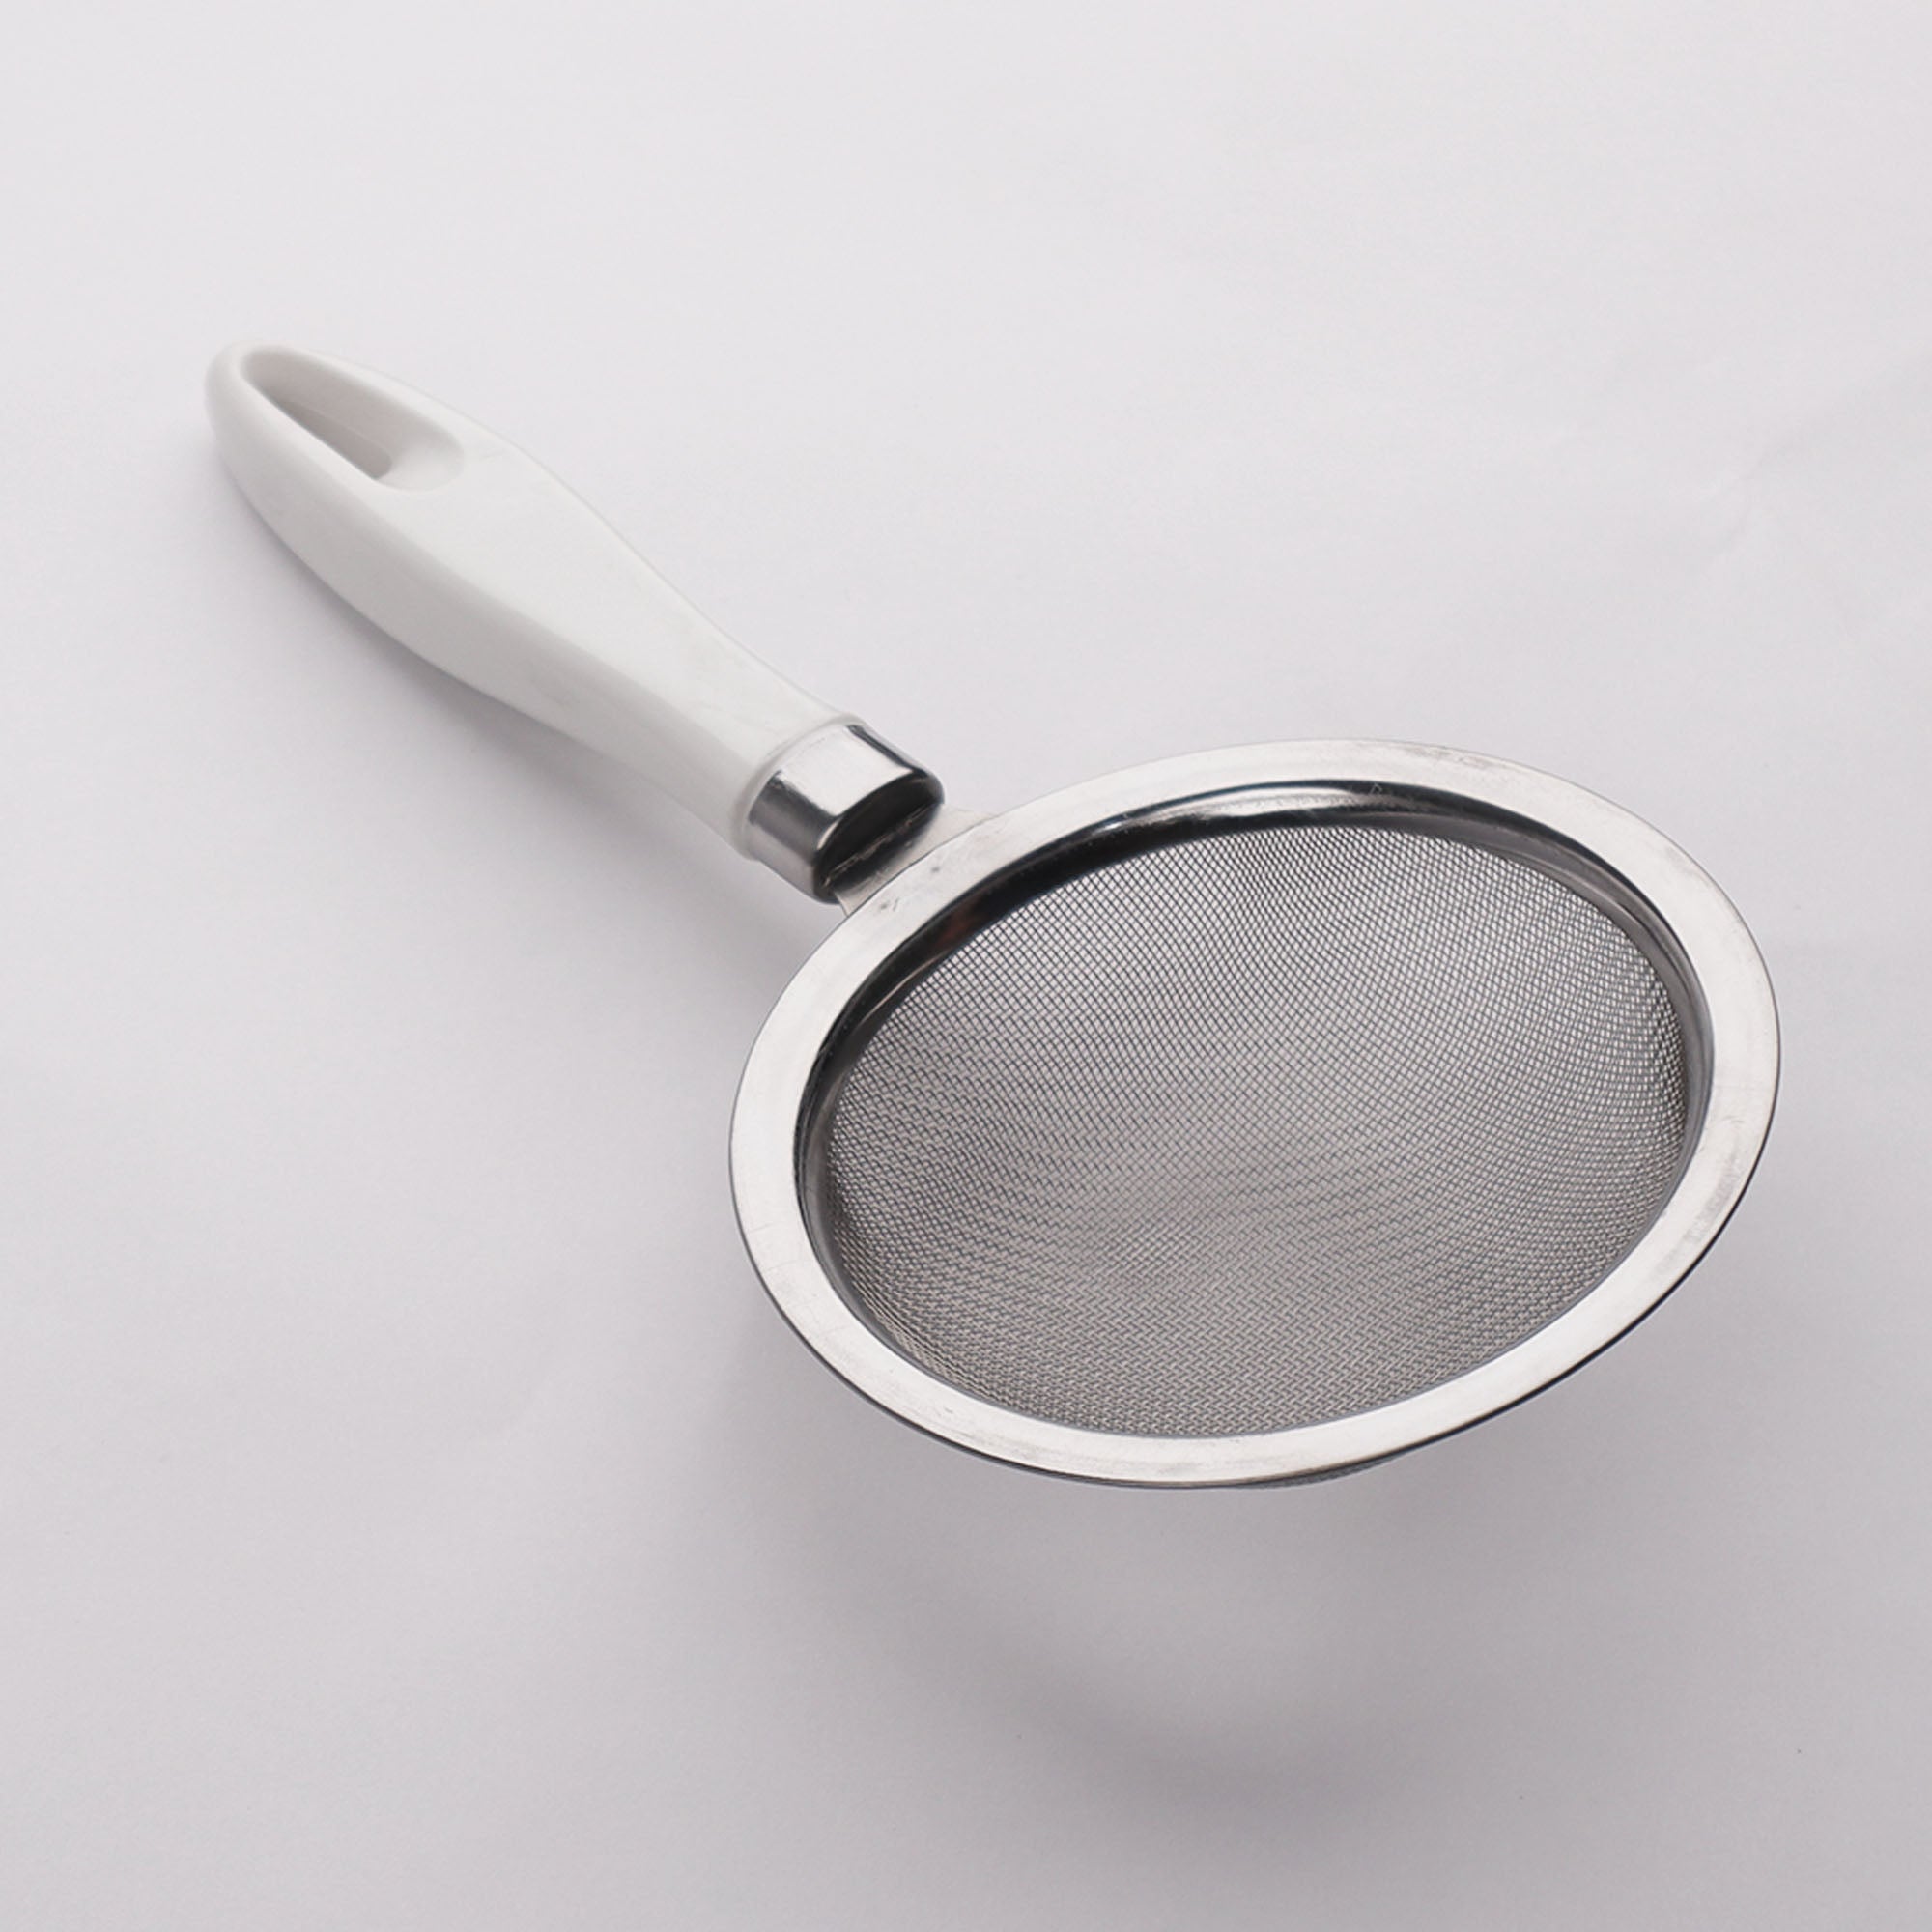 Chef Tea Strainer with white Handle